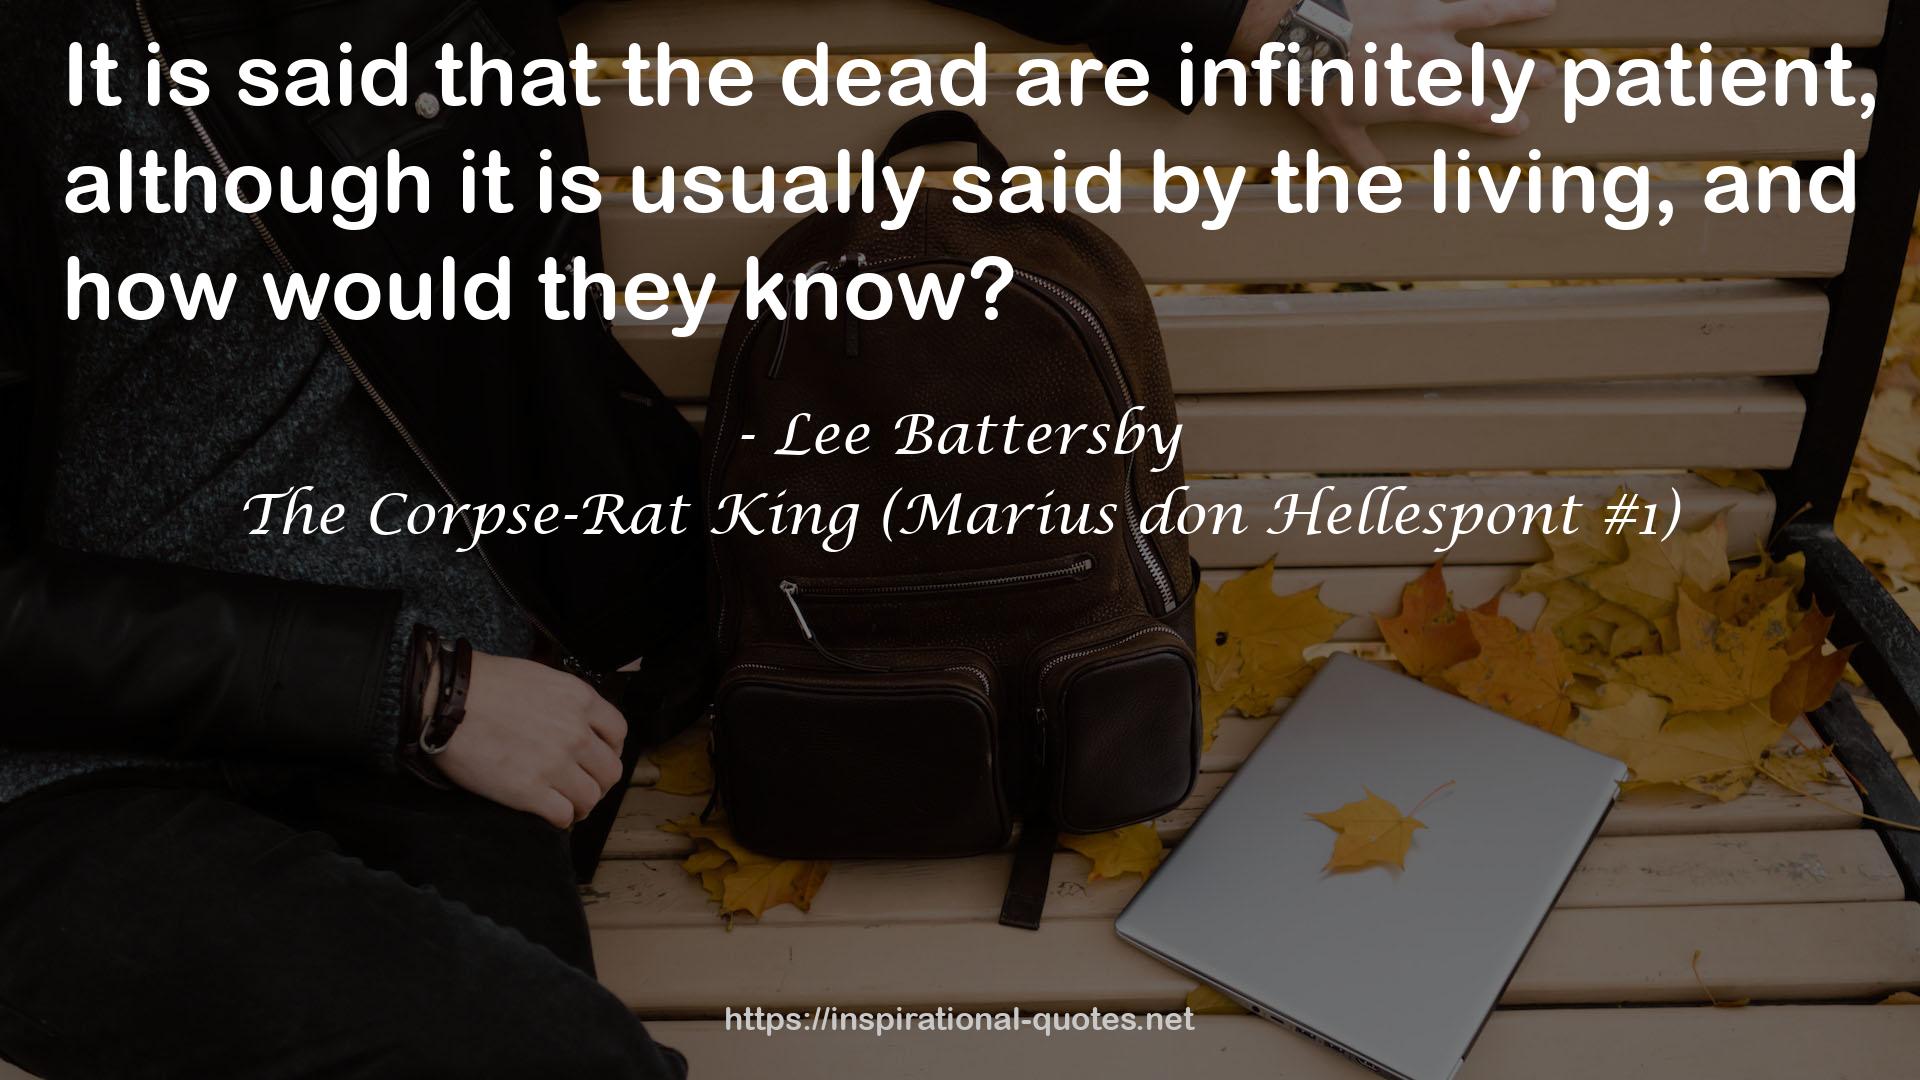 The Corpse-Rat King (Marius don Hellespont #1) QUOTES